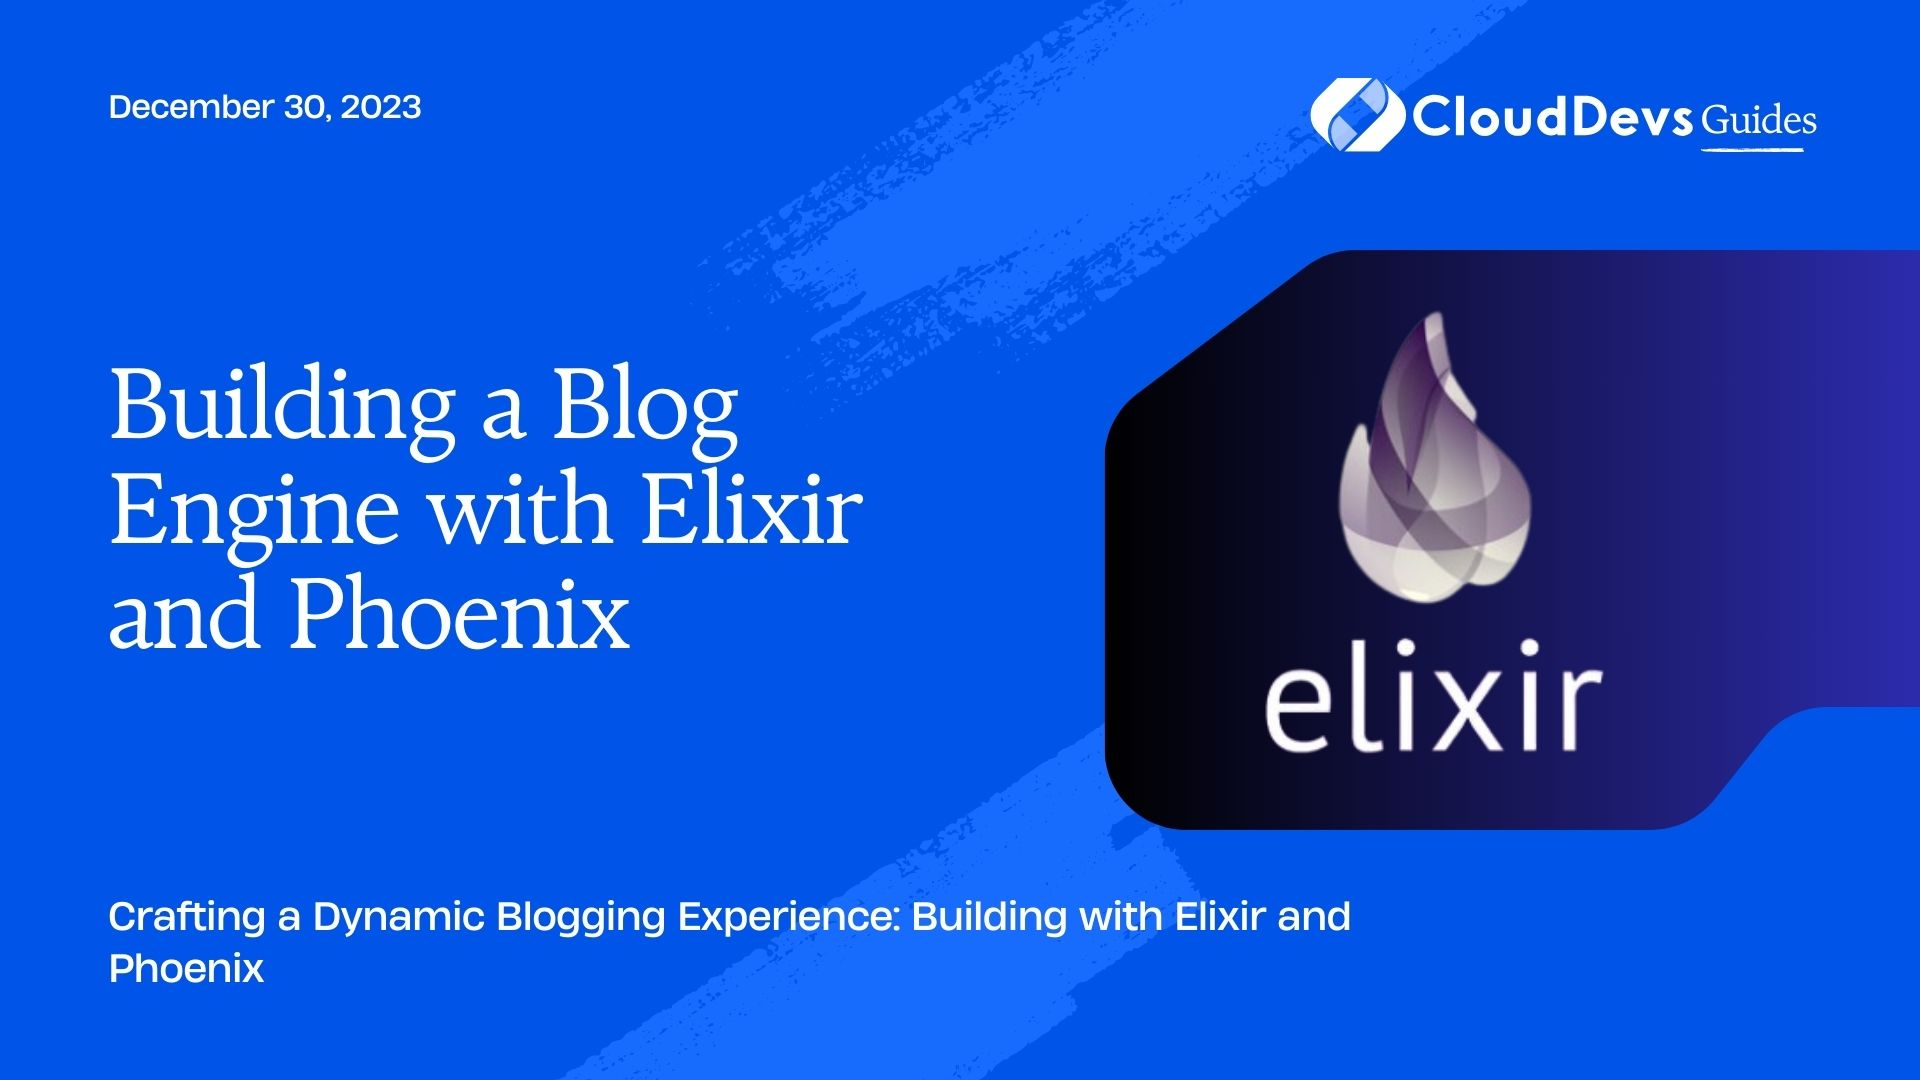 Building a Blog Engine with Elixir and Phoenix